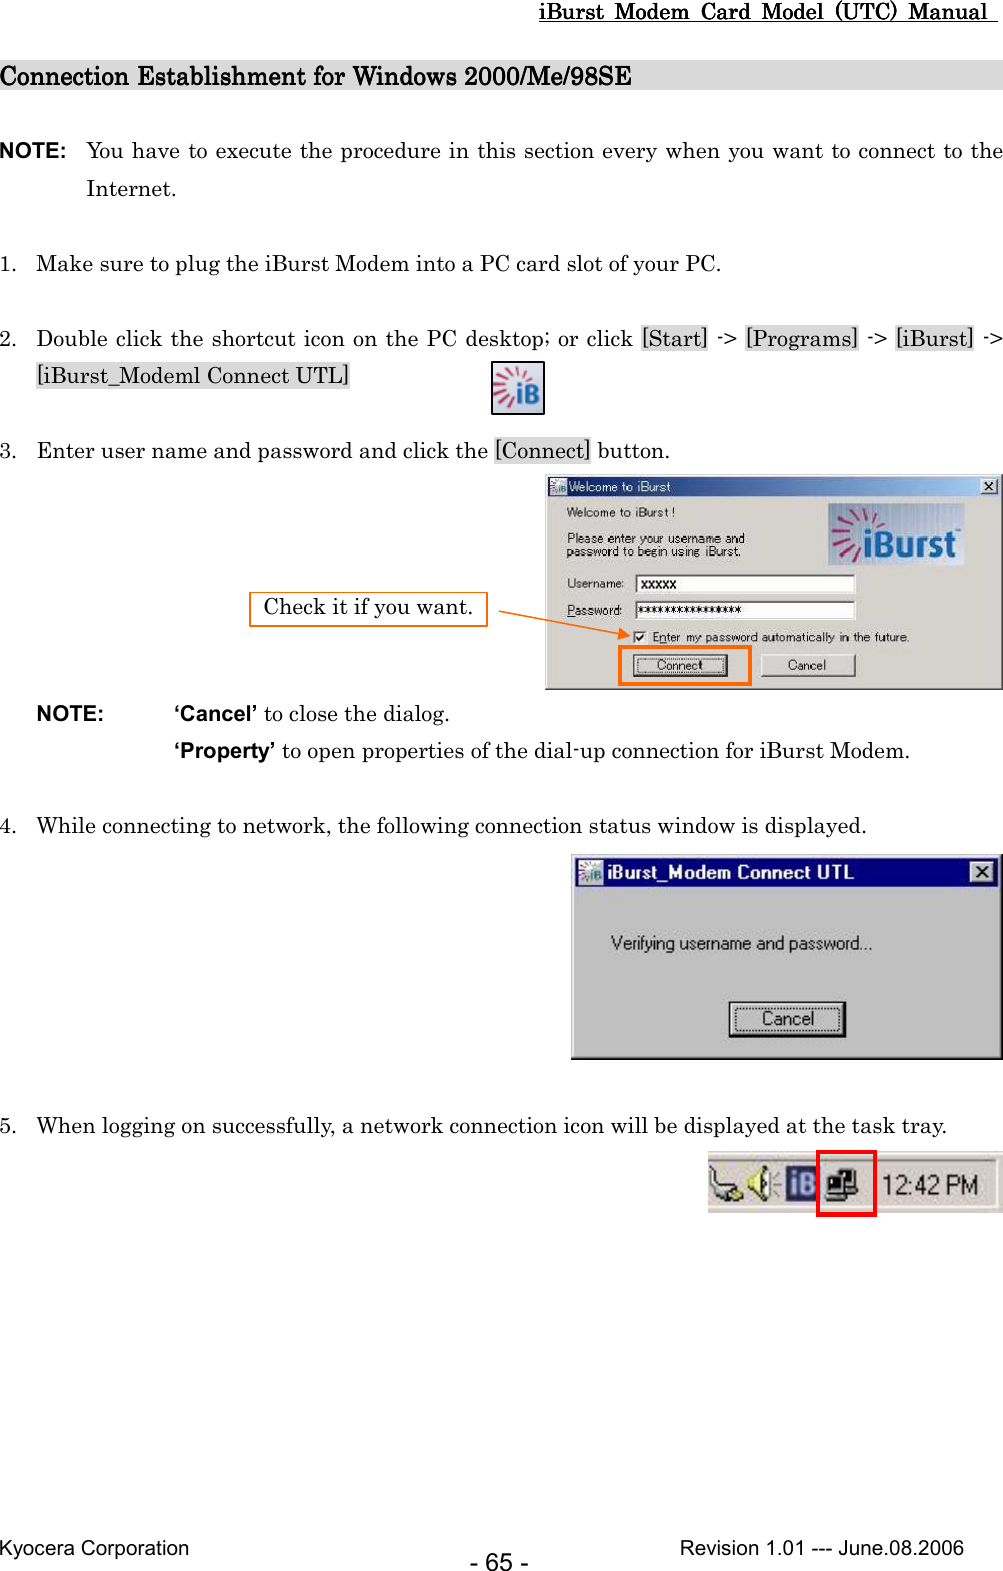 iBurst  Modem  Card  Model  (UTC)  Manual iBurst  Modem  Card  Model  (UTC)  Manual iBurst  Modem  Card  Model  (UTC)  Manual iBurst  Modem  Card  Model  (UTC)  Manual       Kyocera Corporation                                                                                              Revision 1.01 --- June.08.2006 - 65 - Connection Establishment for Windows 2000/Me/98SEConnection Establishment for Windows 2000/Me/98SEConnection Establishment for Windows 2000/Me/98SEConnection Establishment for Windows 2000/Me/98SE                                                                                                                                                          NOTE:  You have to execute the procedure in this section every when you want to connect to the Internet.  1. Make sure to plug the iBurst Modem into a PC card slot of your PC.  2. Double click the shortcut icon on the PC desktop; or click [Start] -&gt; [Programs] -&gt; [iBurst] -&gt; [iBurst_Modeml Connect UTL]  3. Enter user name and password and click the [Connect] button.       NOTE:  ‘Cancel’ to close the dialog. ‘Property’ to open properties of the dial-up connection for iBurst Modem.  4. While connecting to network, the following connection status window is displayed.   5. When logging on successfully, a network connection icon will be displayed at the task tray.  Check it if you want. 